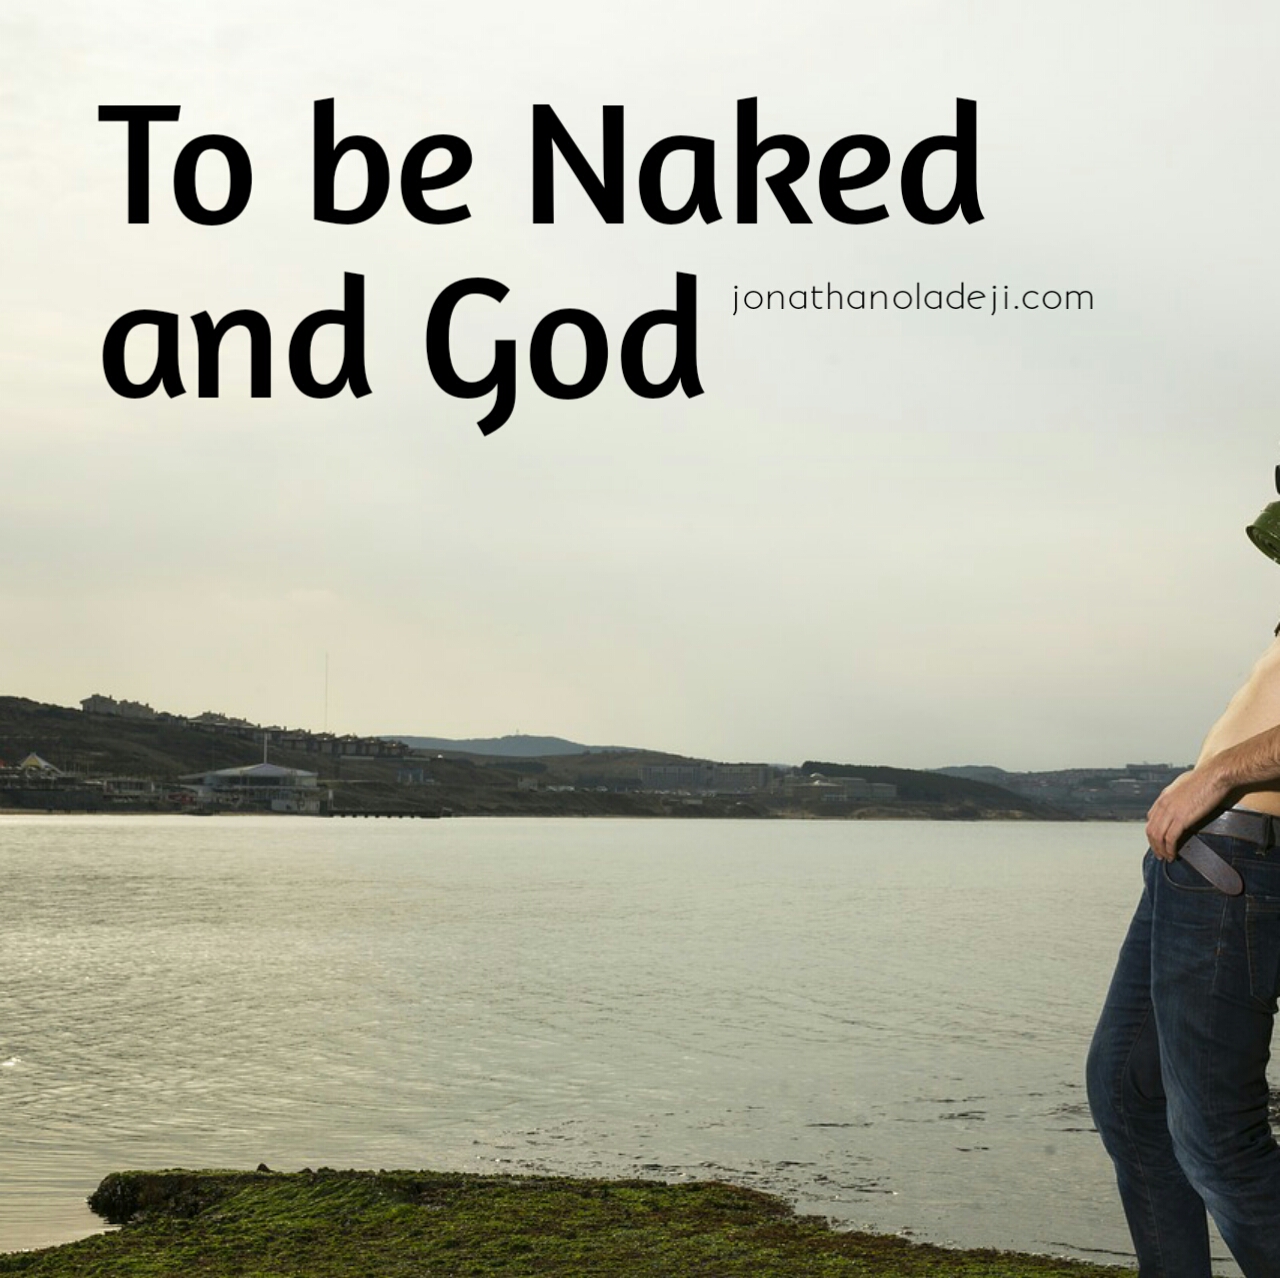 To be Naked and God